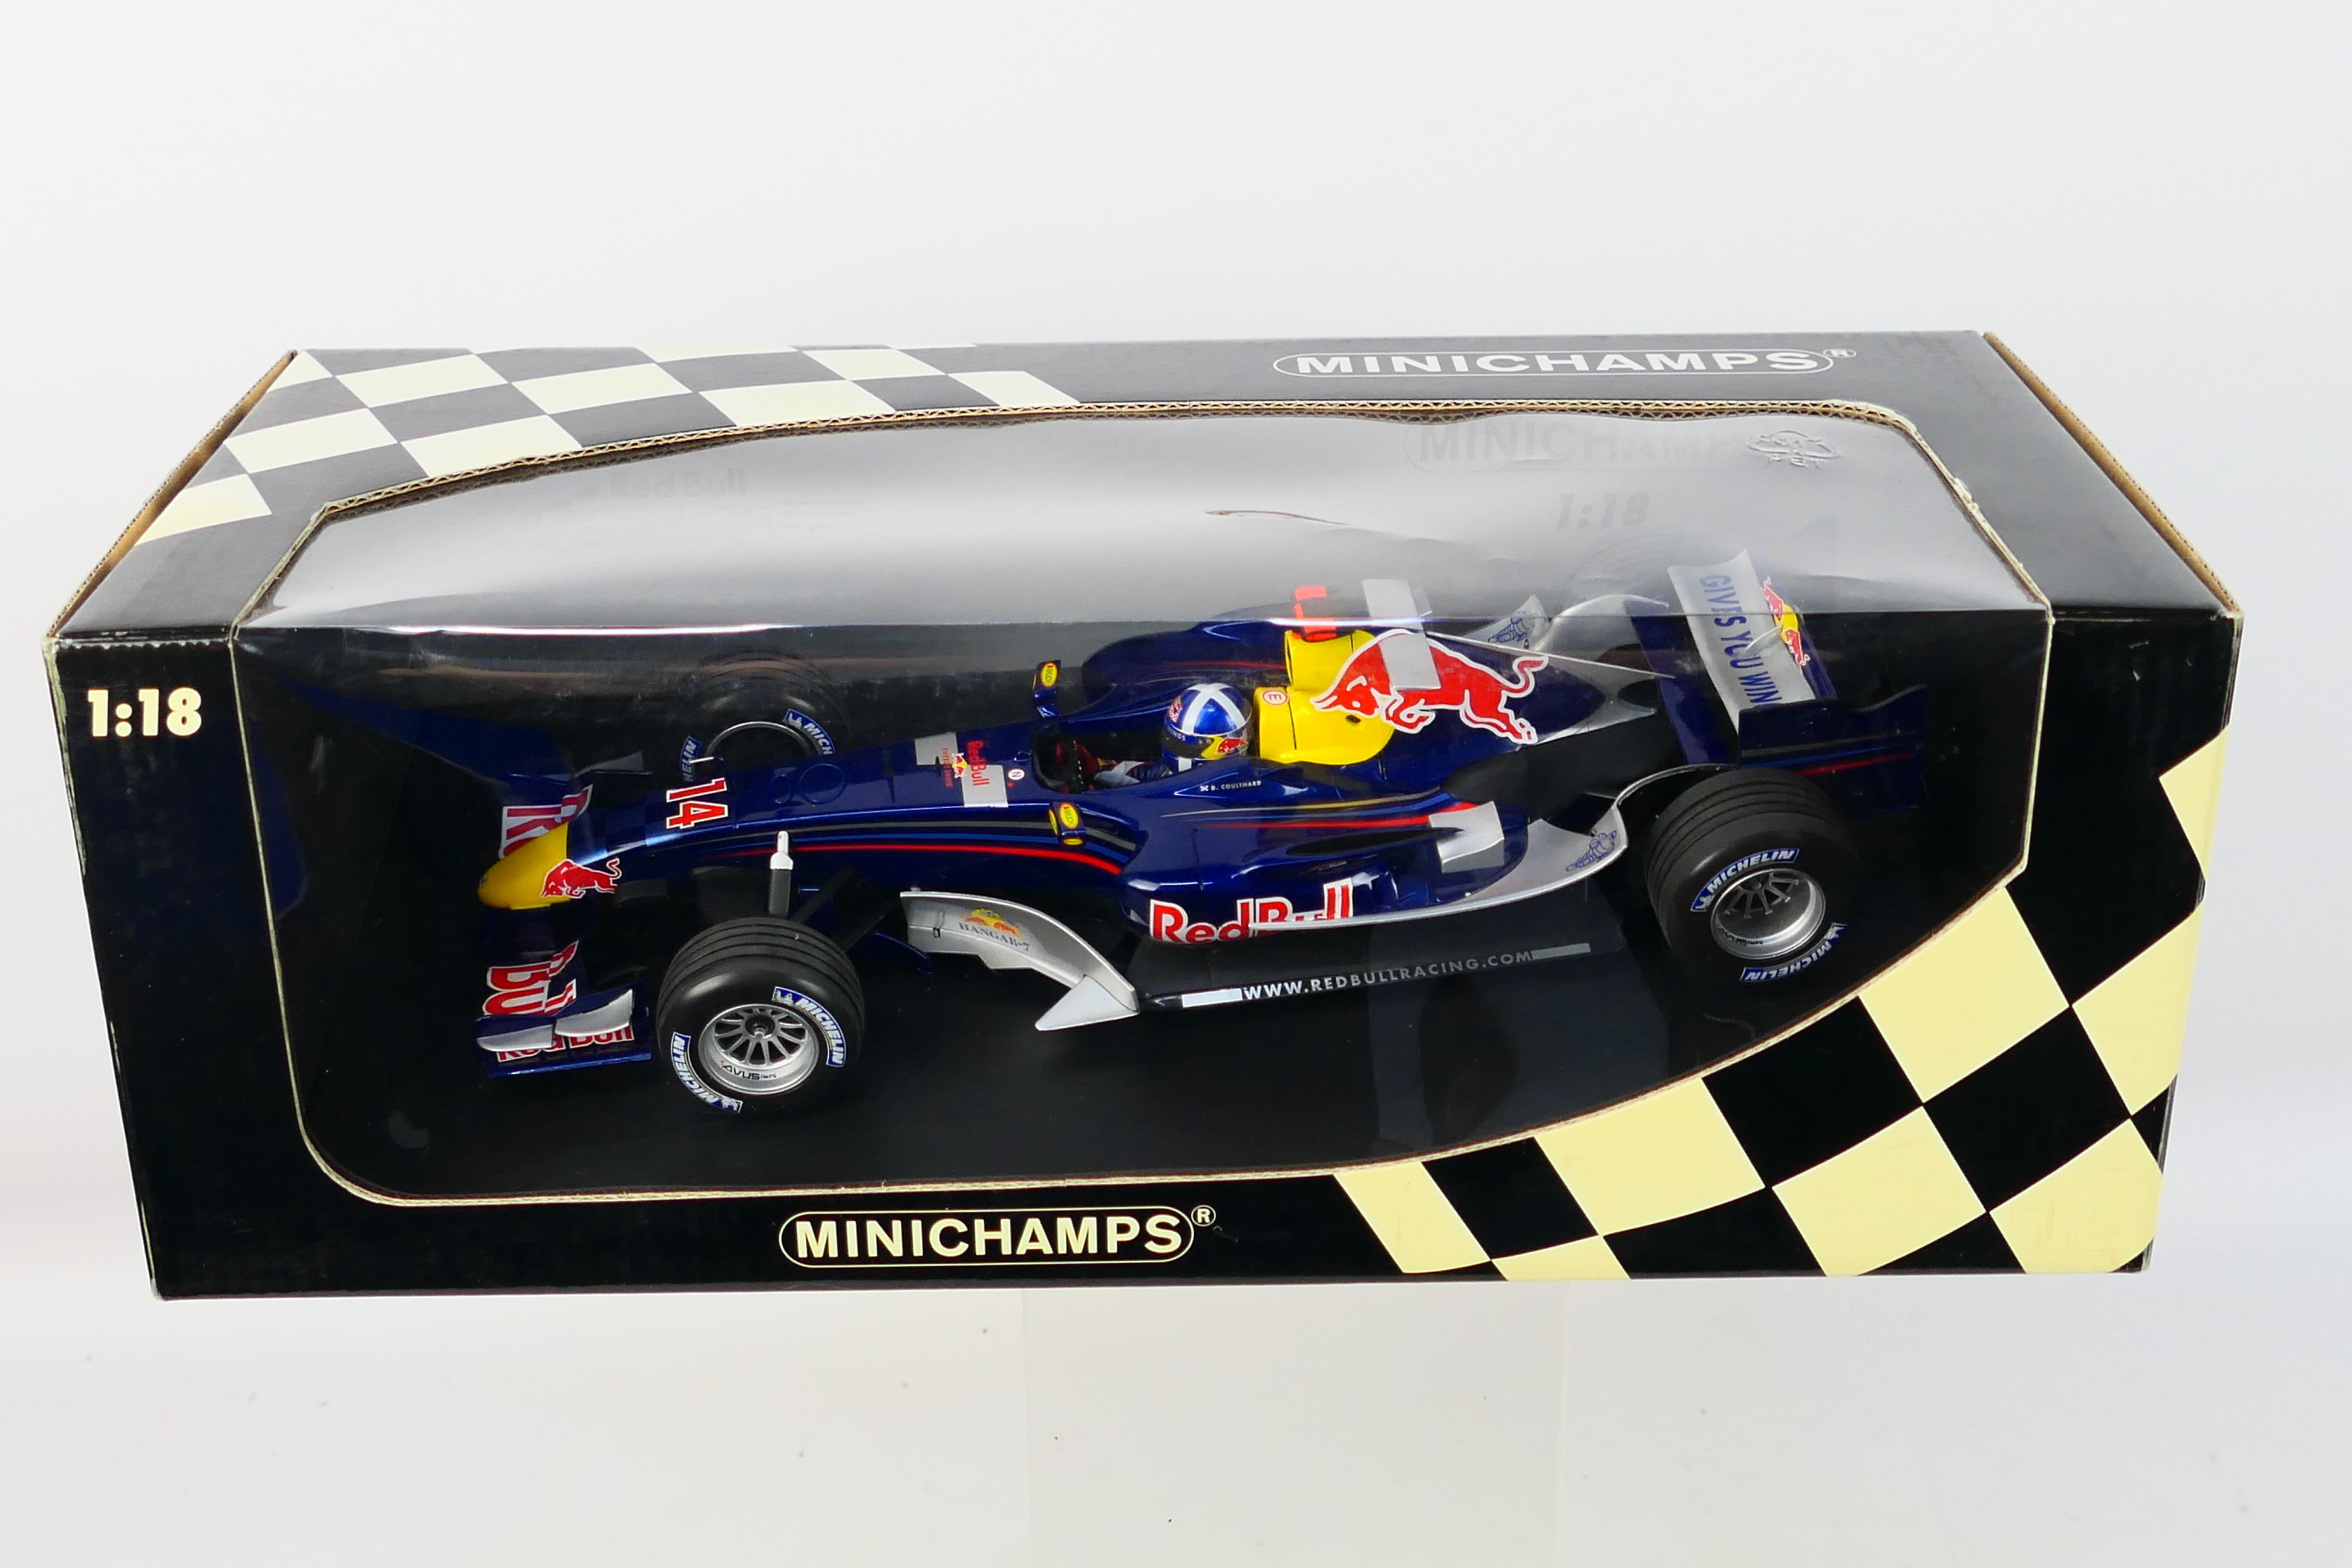 Minichamps- A boxed 1:18 scale Red Bull Racing RB2 David Coulthard 2006 car which appears Mint in a - Bild 3 aus 3